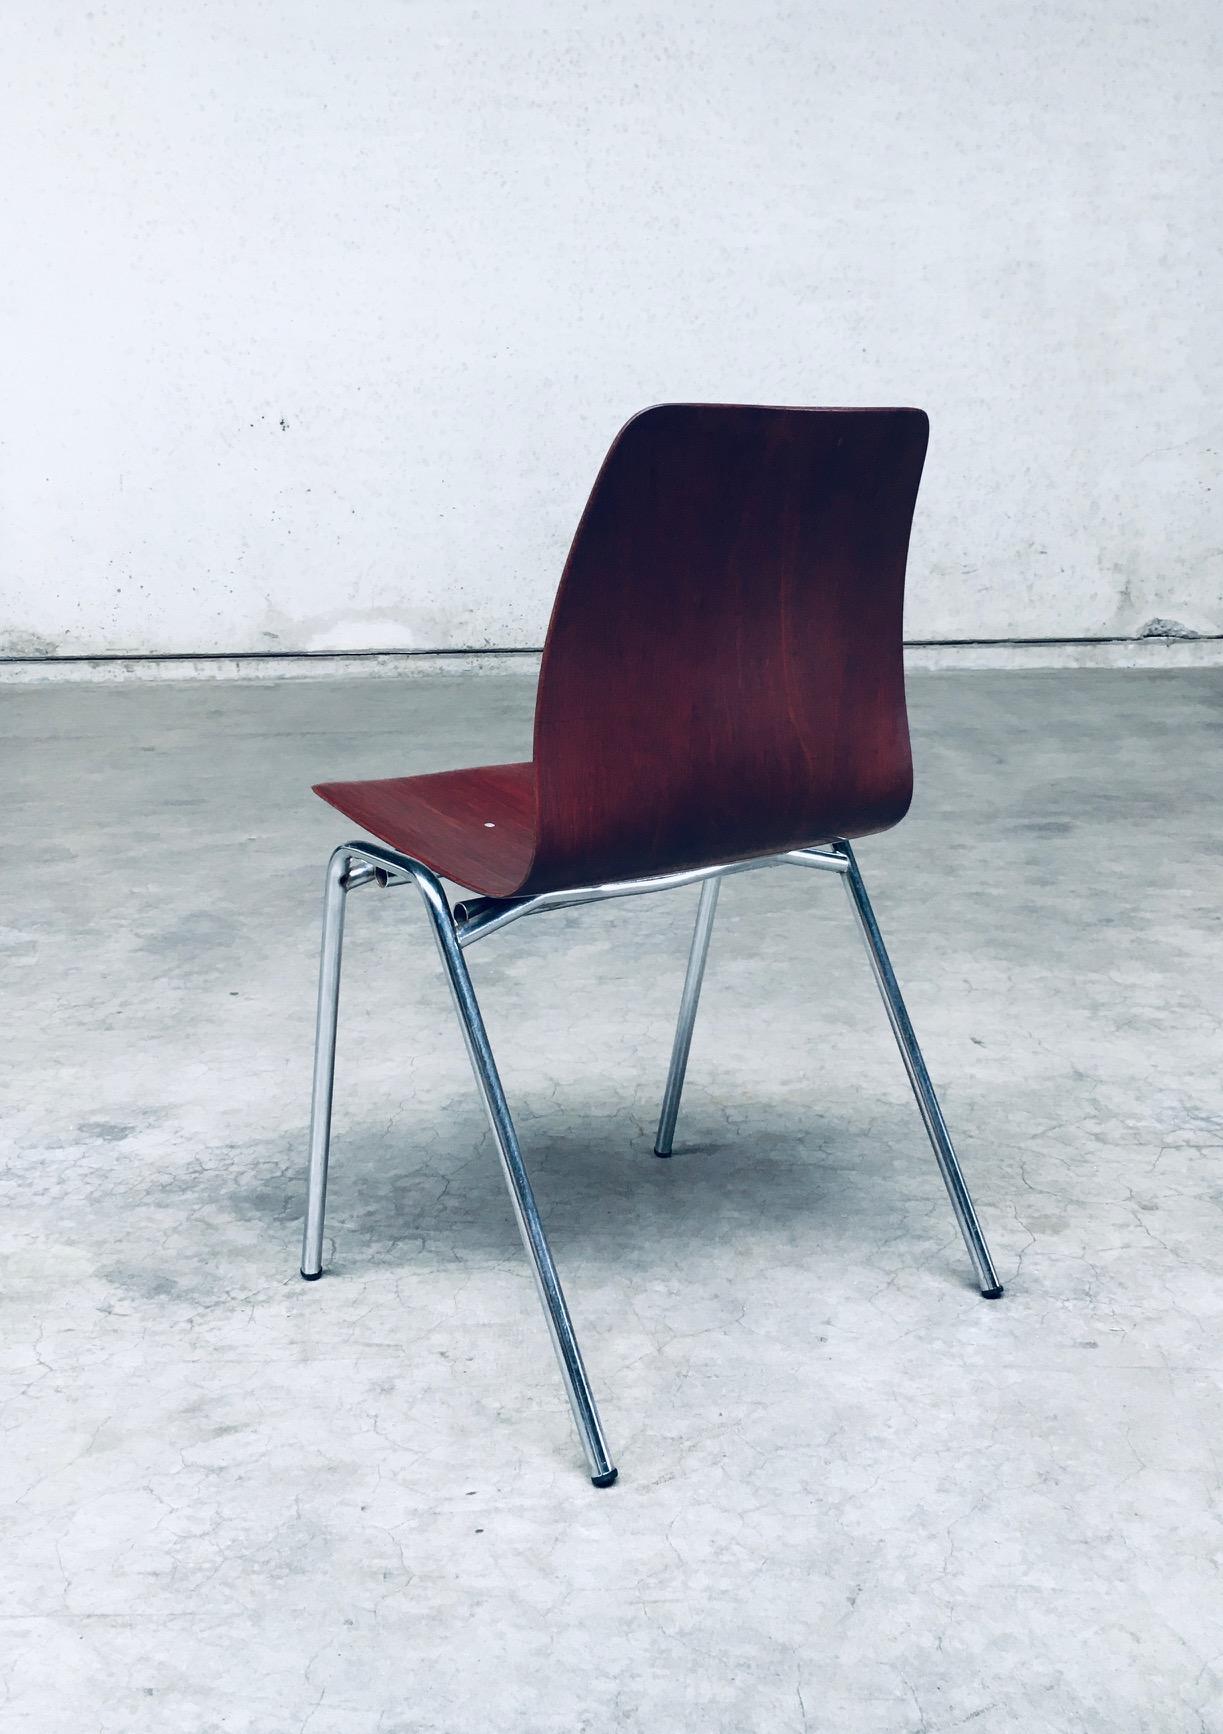 Midcentury Design Stacking Chairs by Elmar Flötotto for Pagholz, 1960's Germany For Sale 4